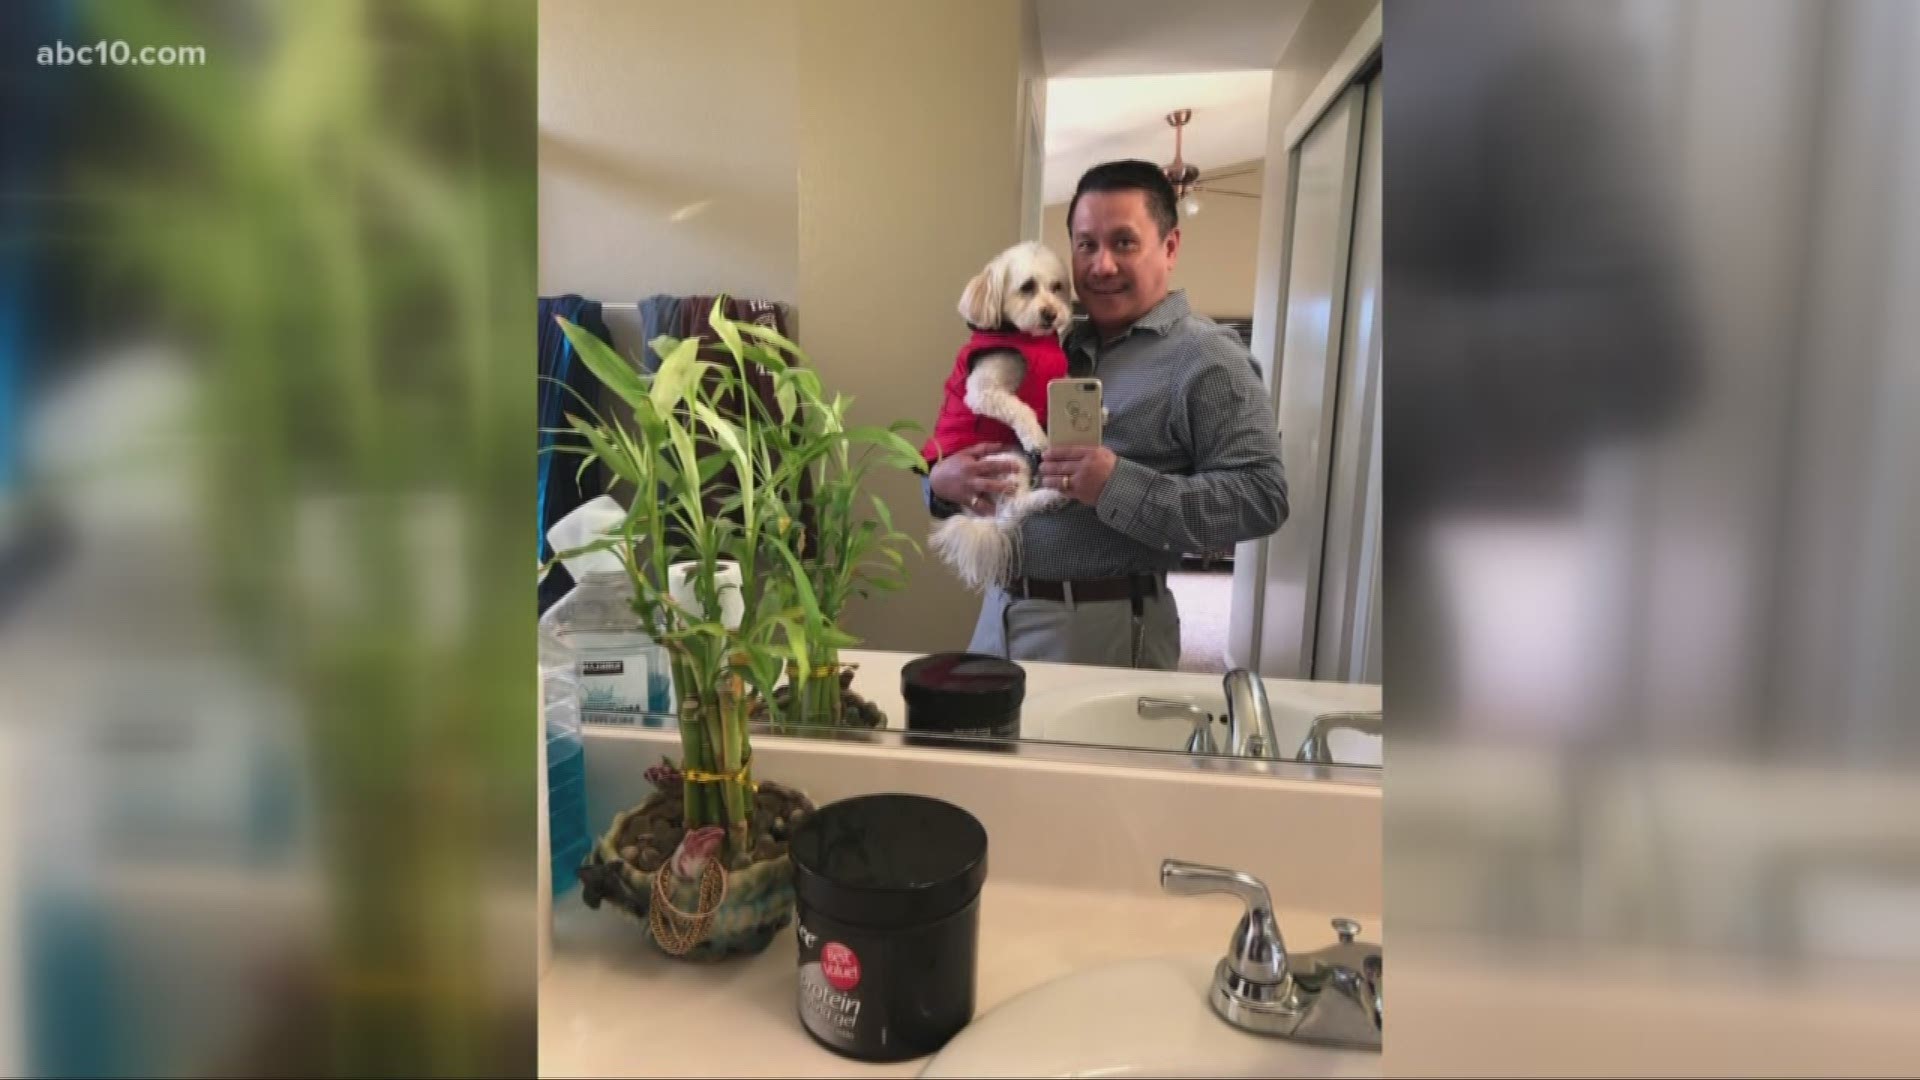 Jordan and dog "Charlie" are the ABC10 Viewers of the Day for Feb. 24, 2020. If you want to be a viewer of the day text your picture to 916-321-3310.